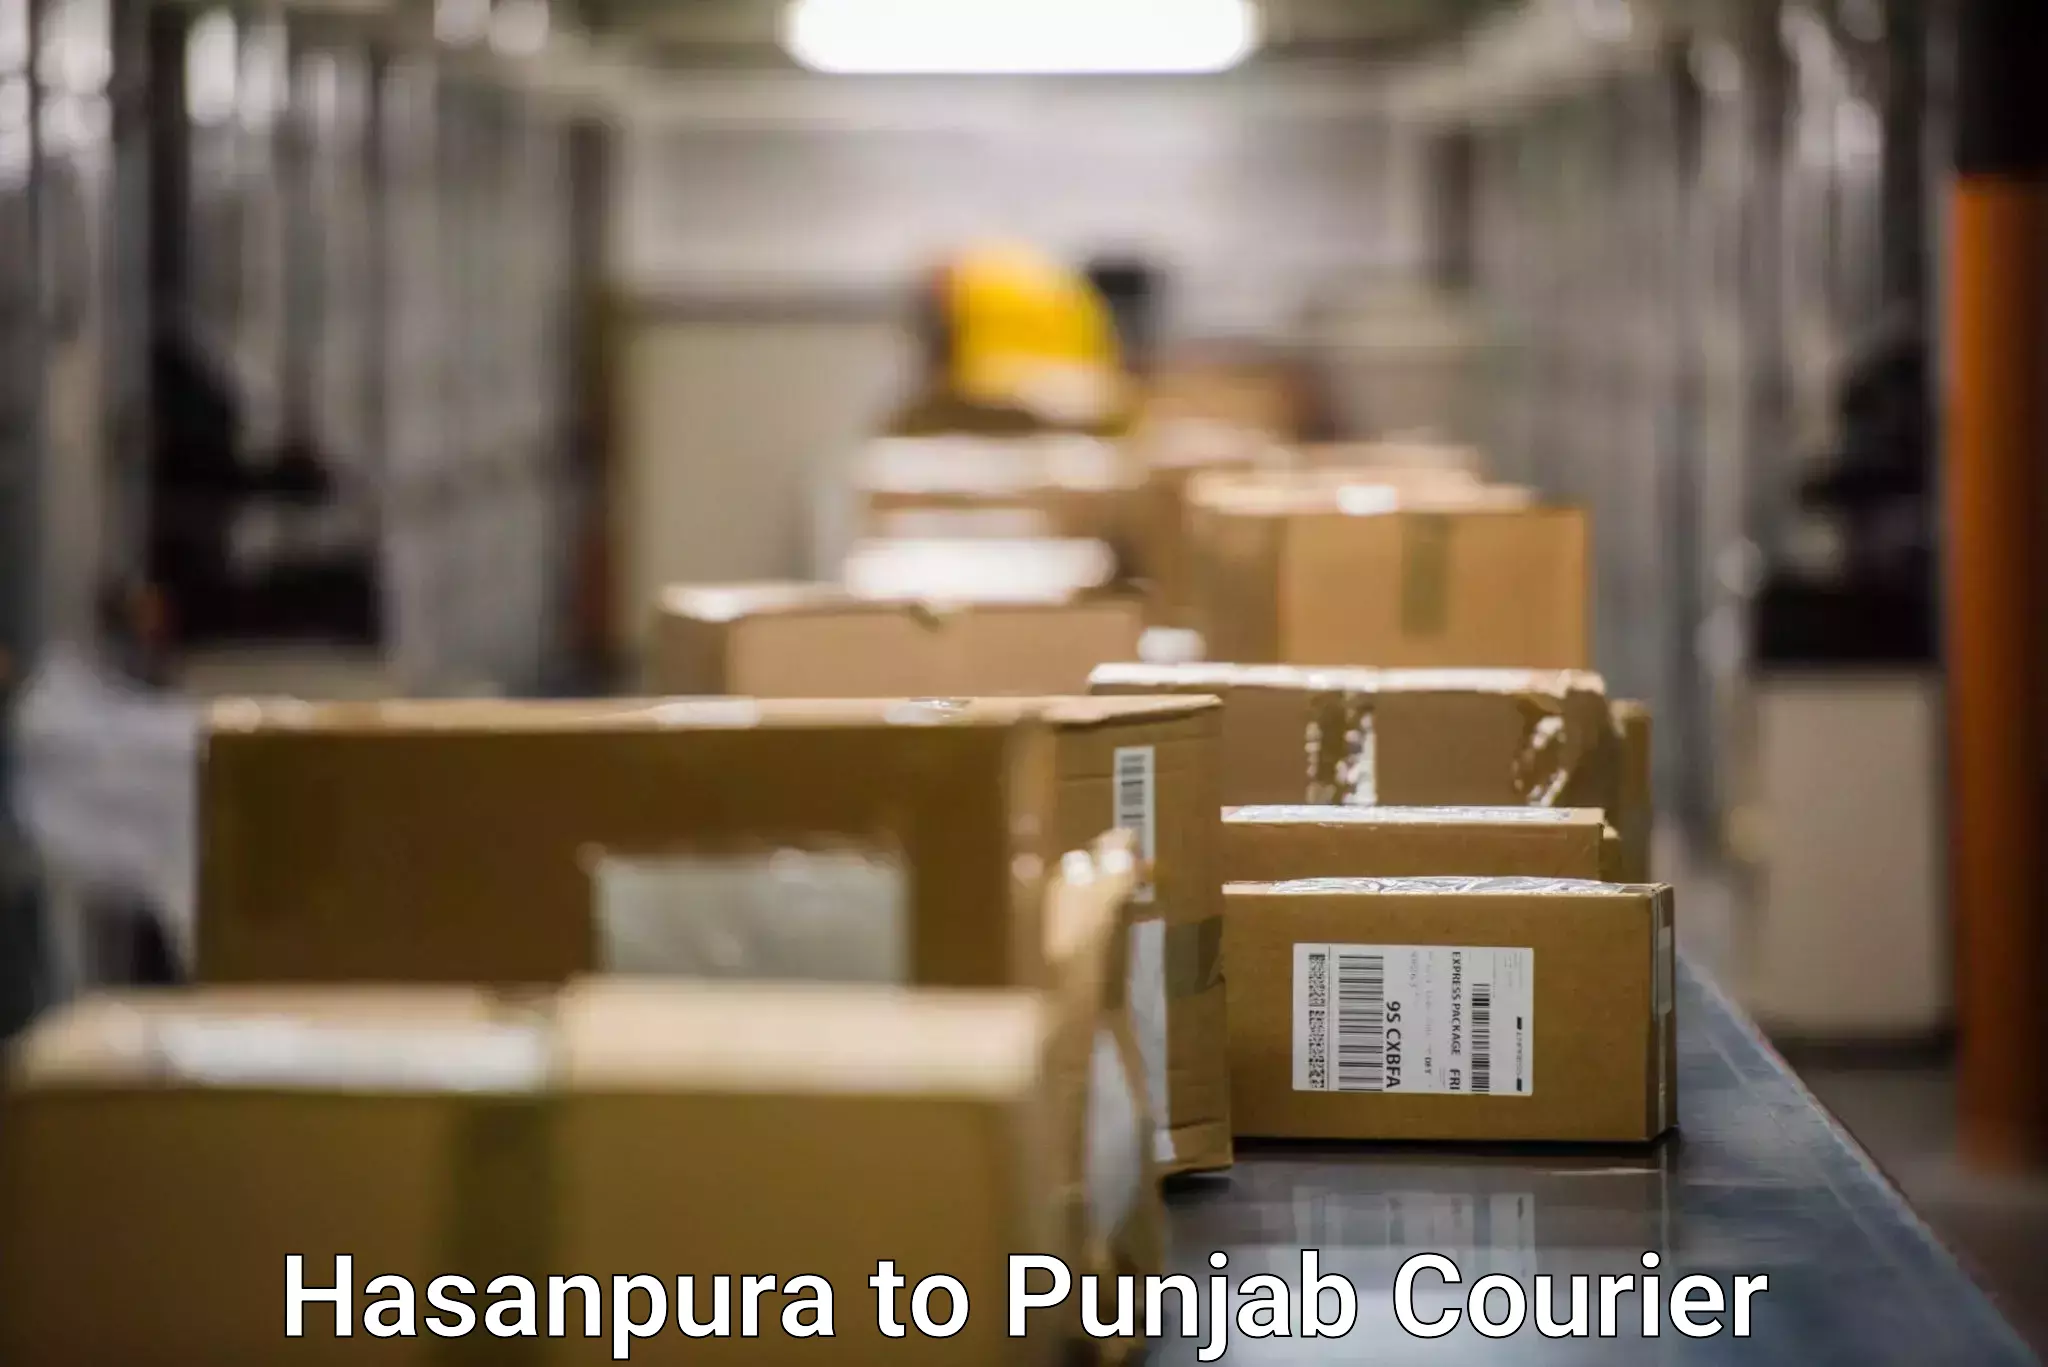 Modern delivery technologies Hasanpura to Punjab